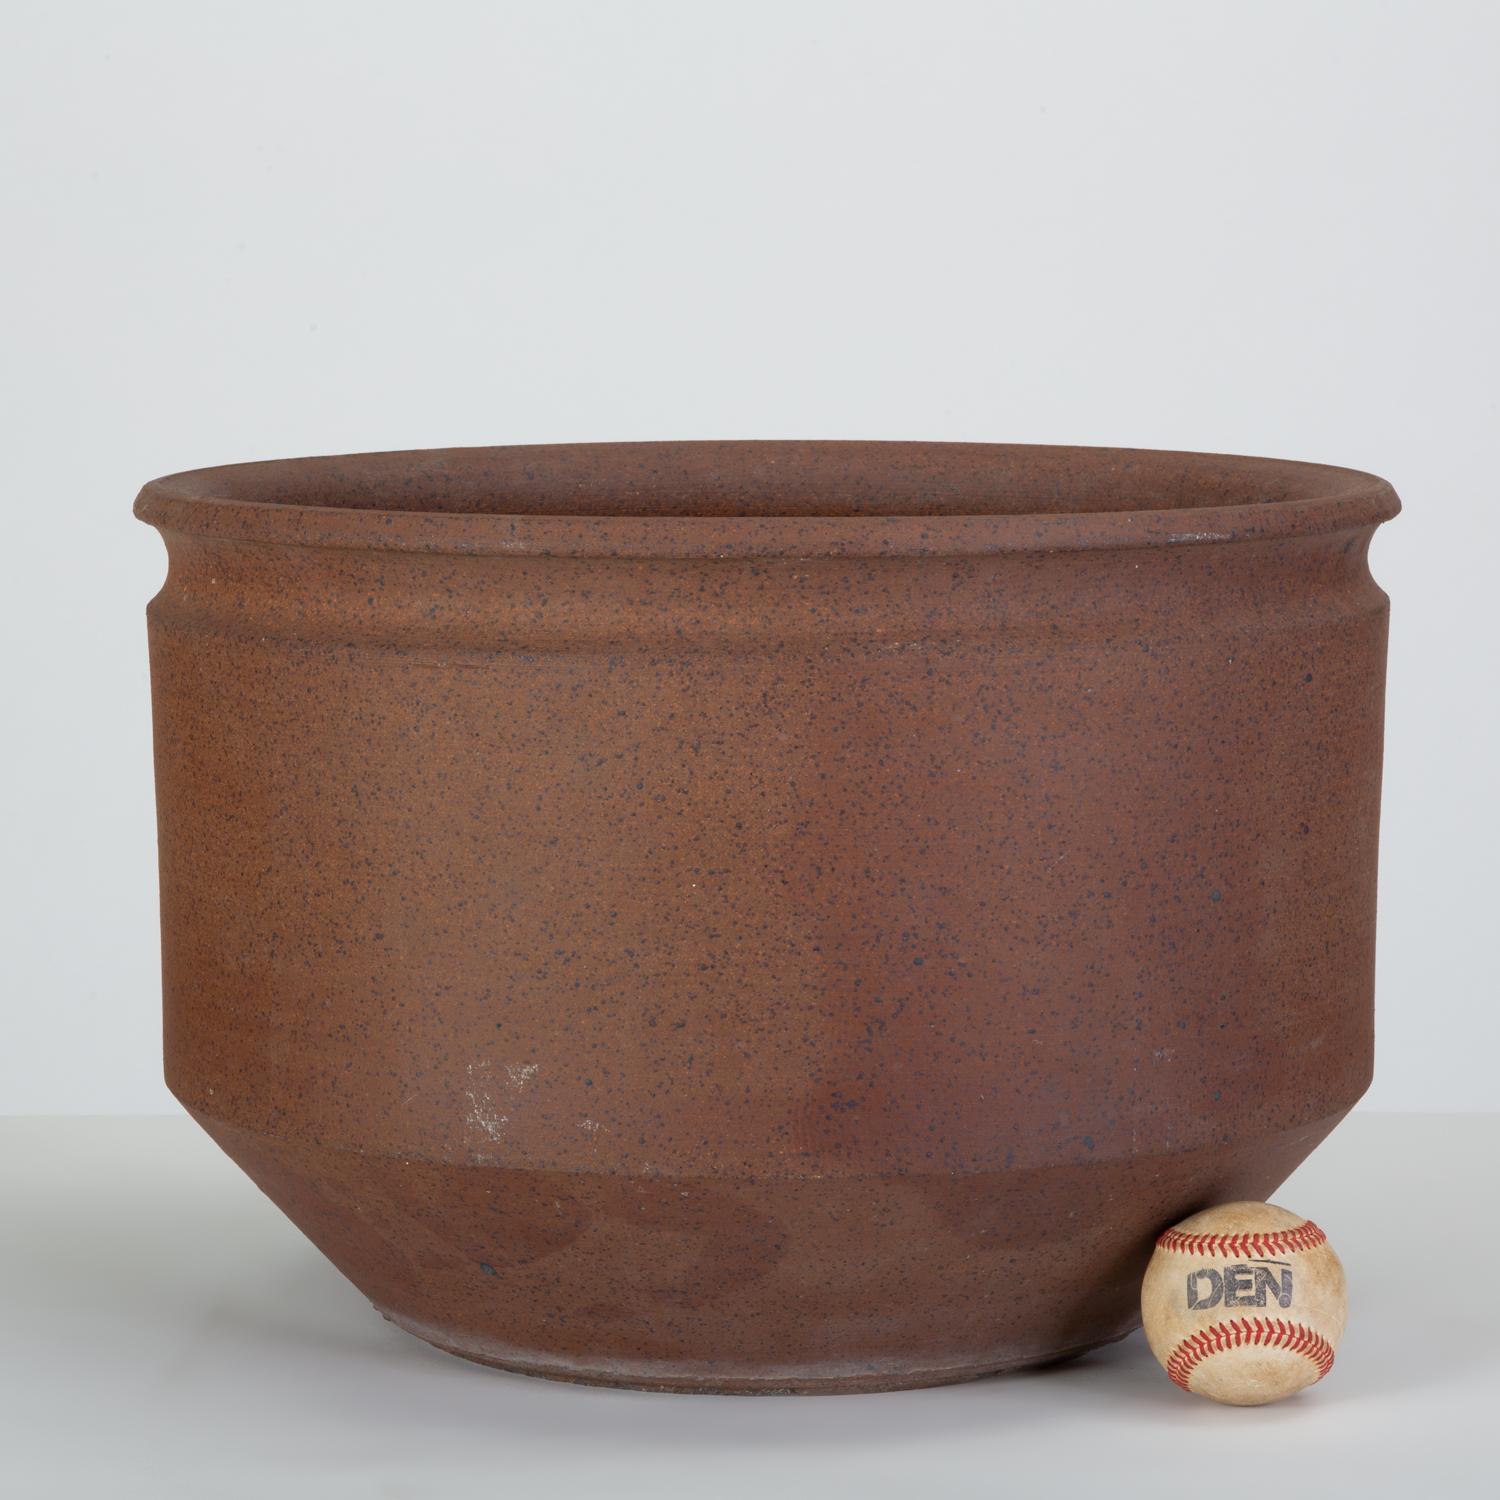 A wide, Minimalist stoneware planter from Robert Maxwell and David Cressey’s 1970s collaboration, Earthgender. This example is untextured, with flat sides angling towards the foot. A wide, notched lip is its single decorative element. We have two